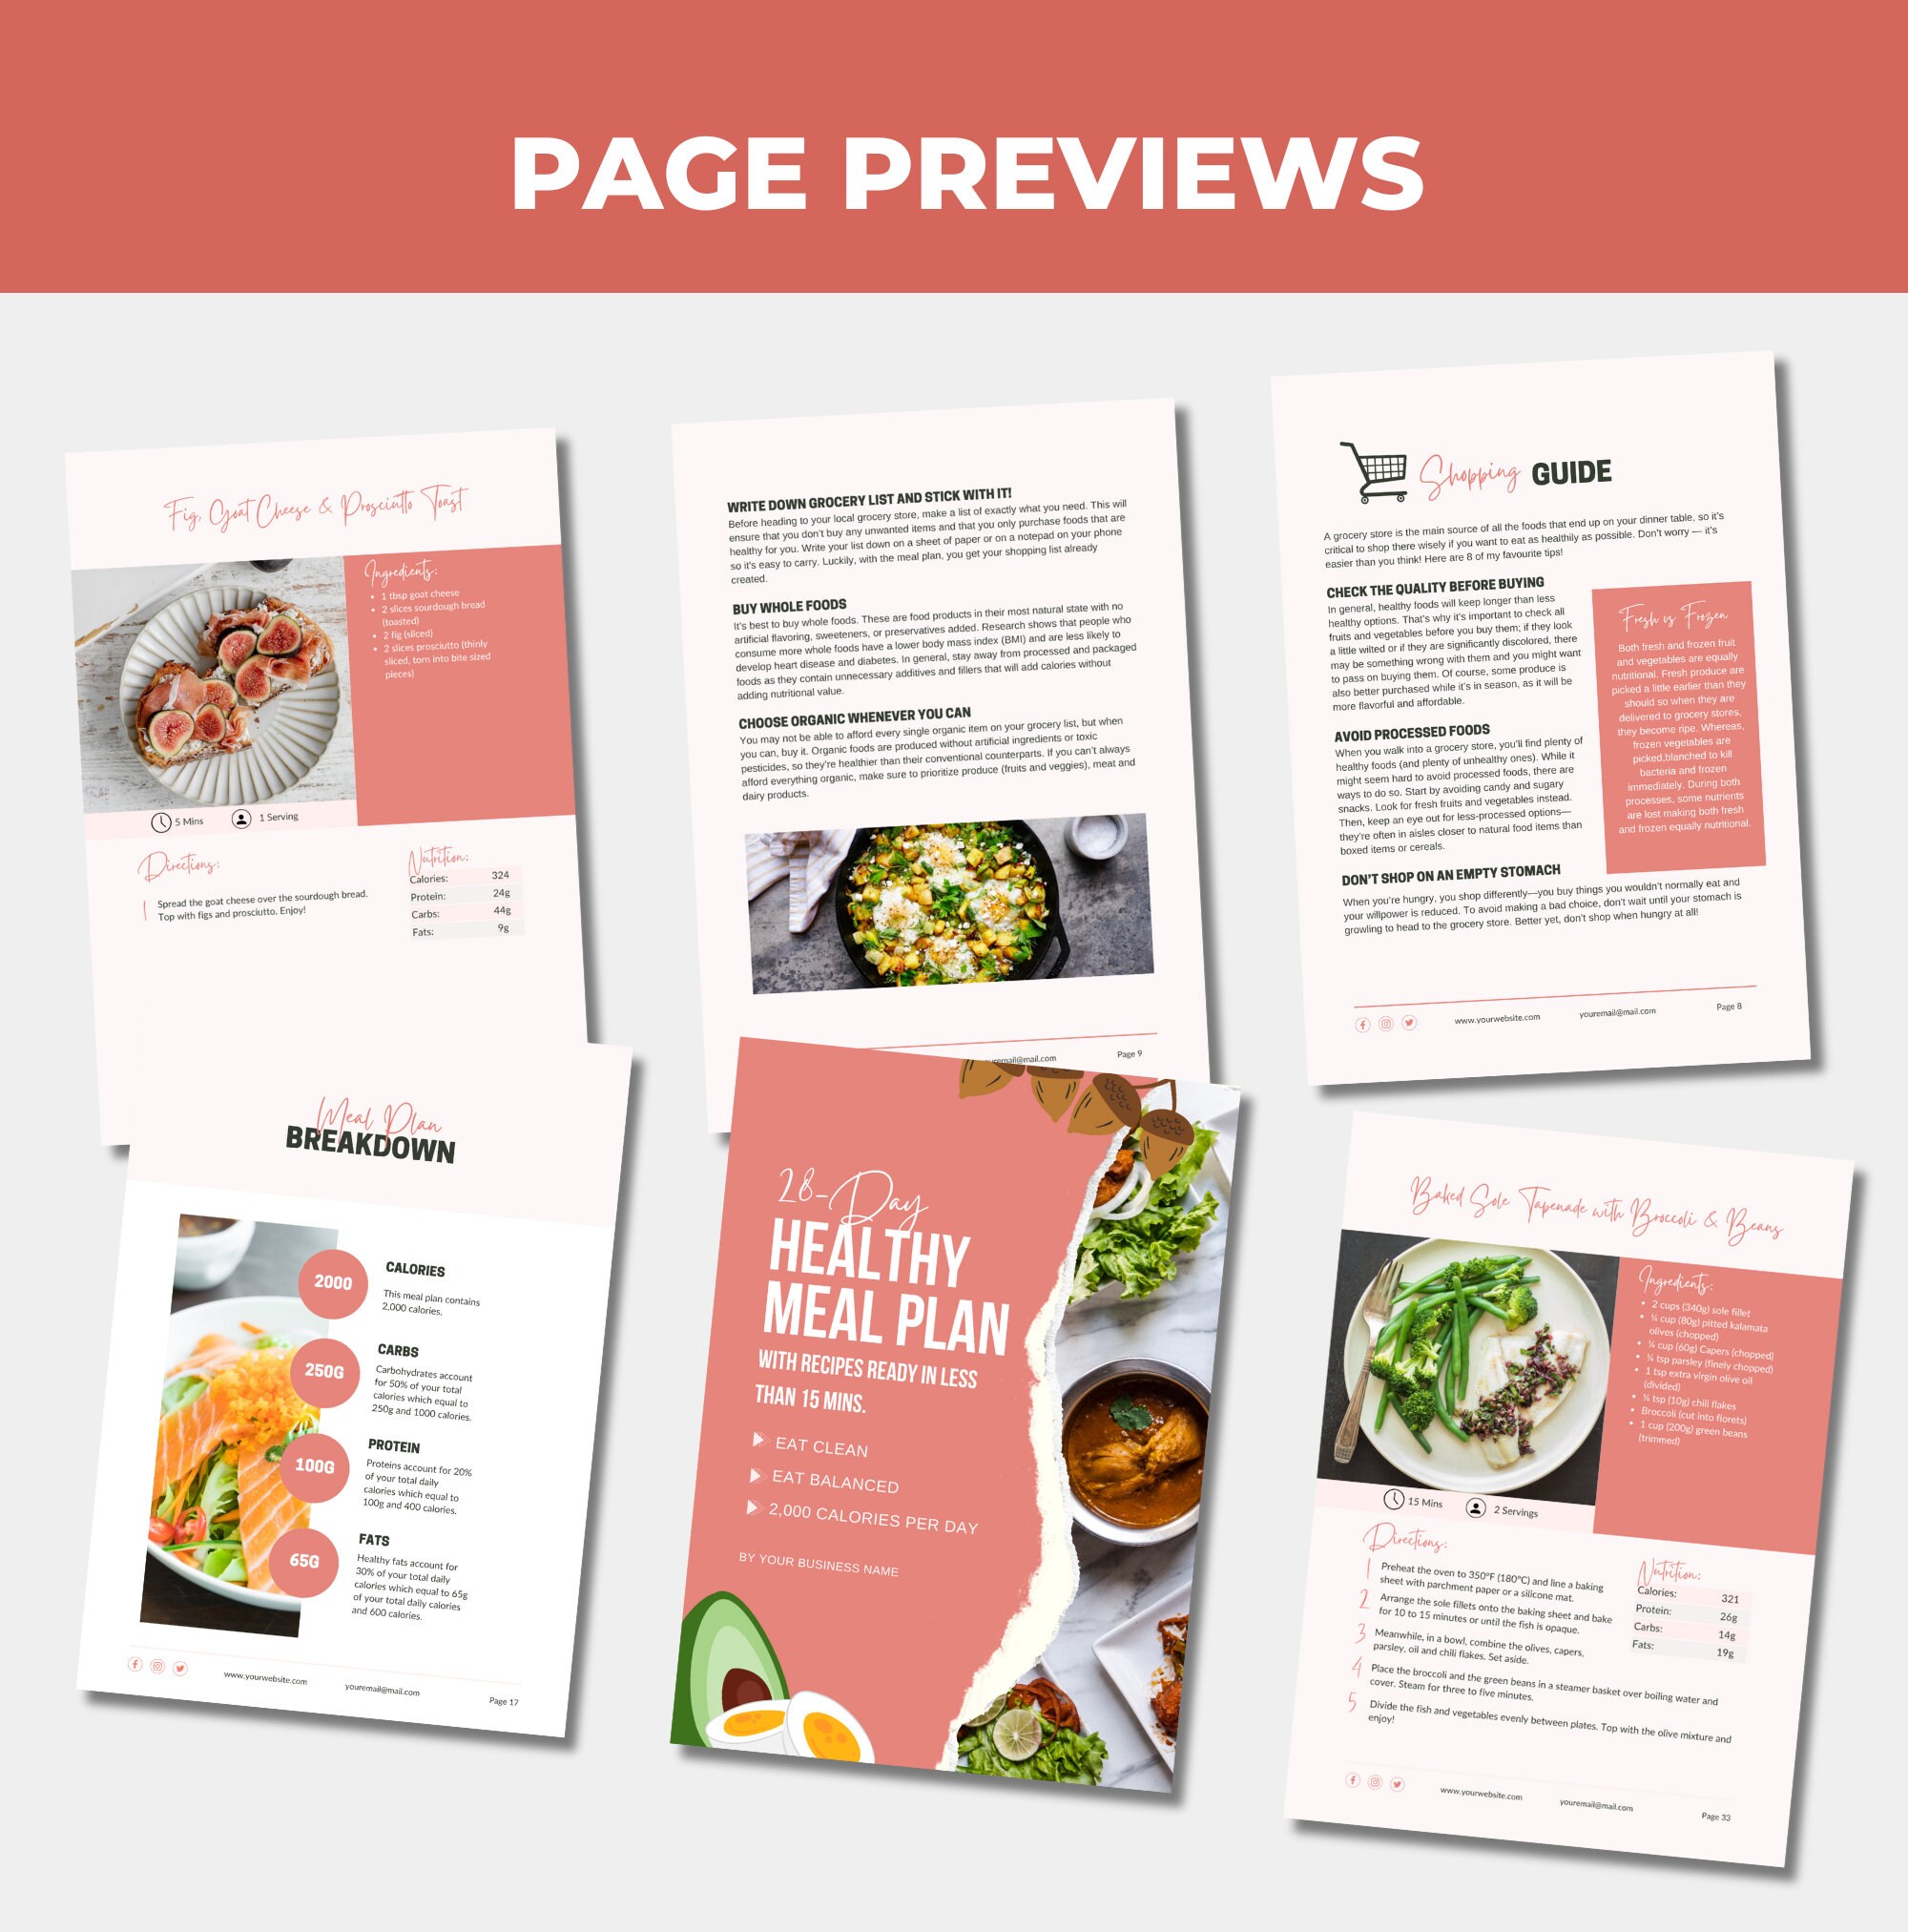 28-day Healthy Meal Plan Template With Healthy Recipes, 2,000 Calories ...